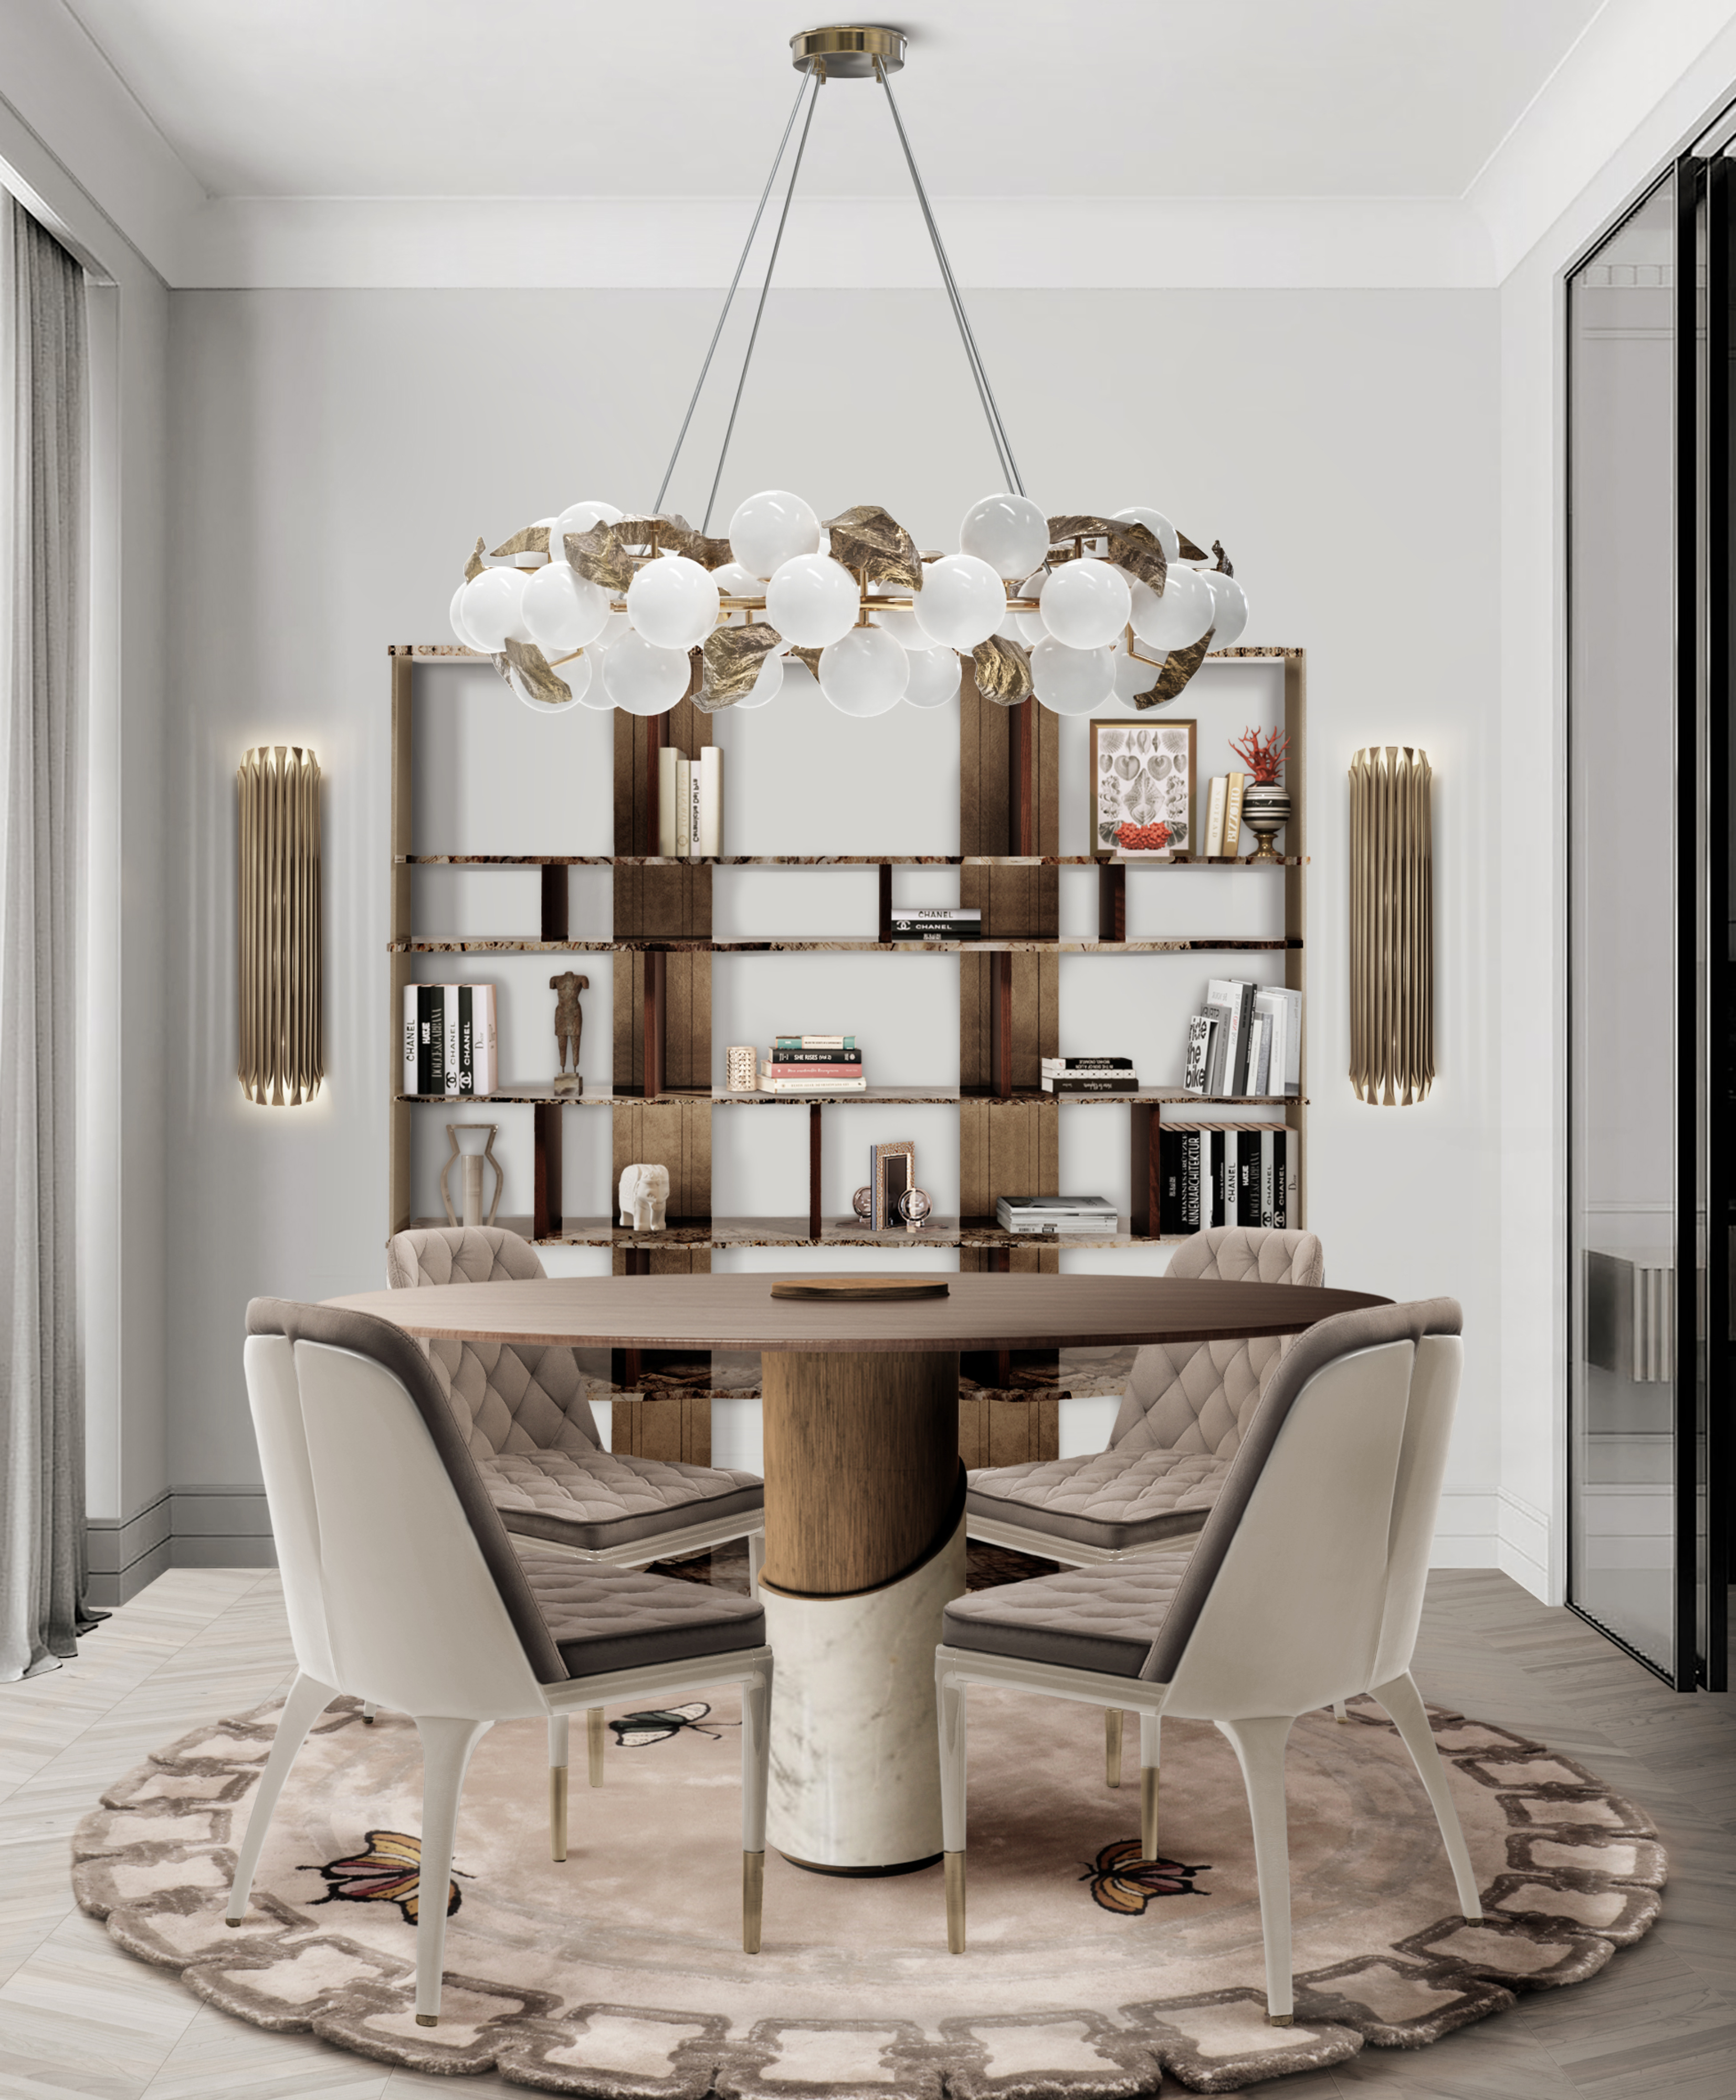 Neutral-toned dining room with metamorphosis rug by Rug'Society